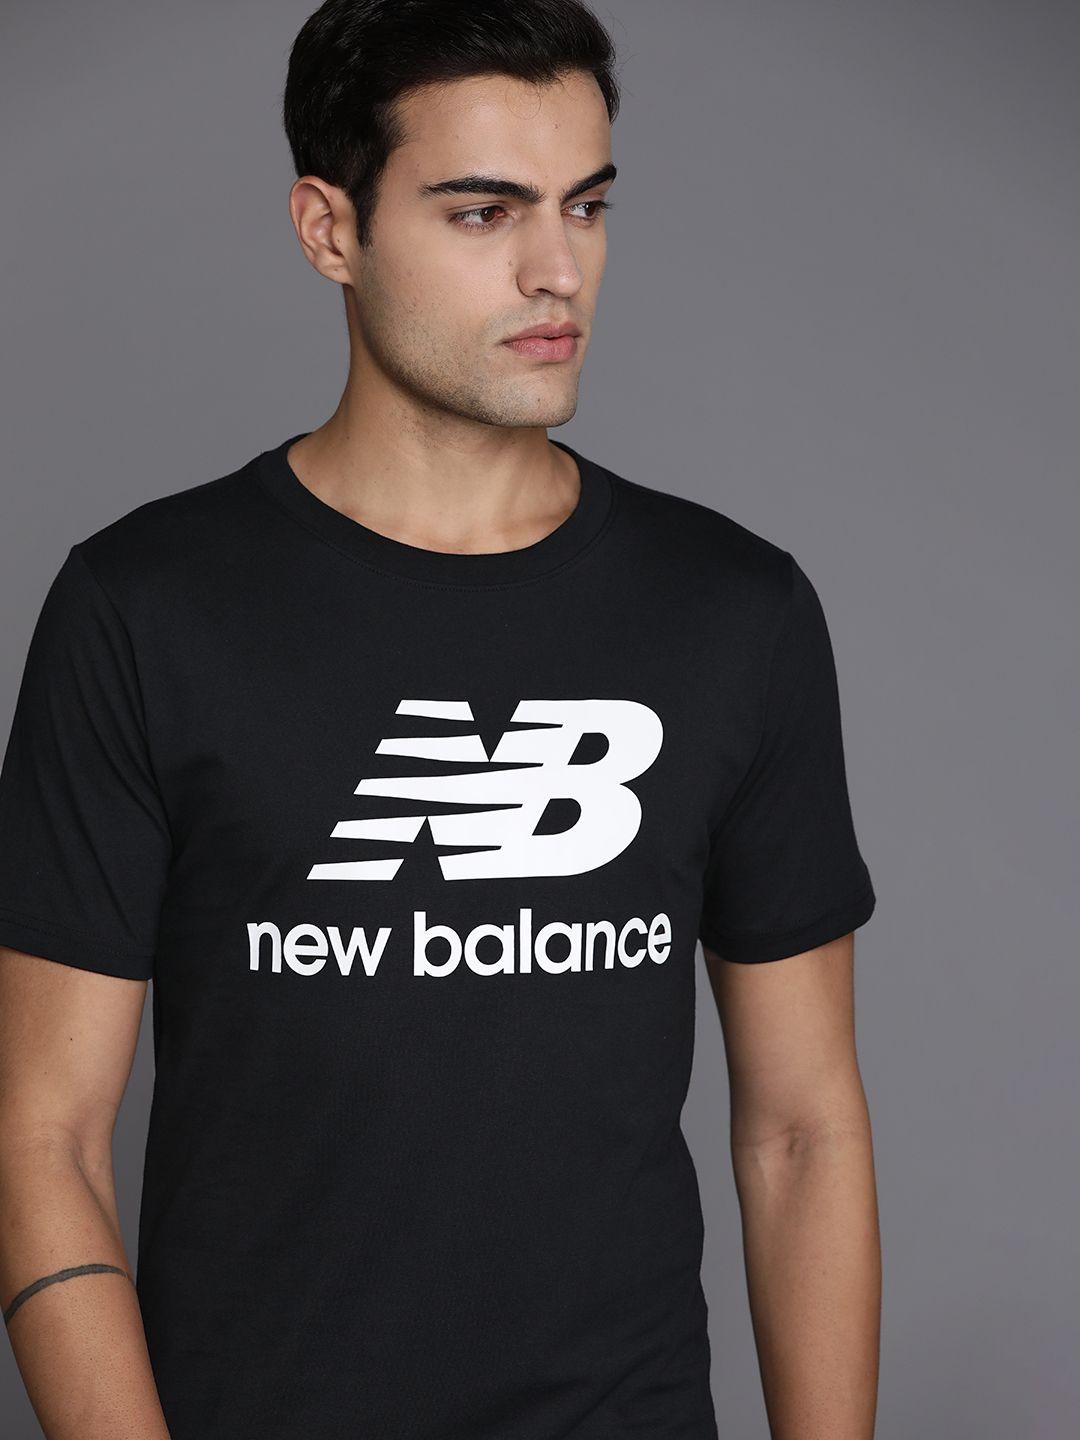 new balance sustainable athletic brand logo printed abzorb t-shirt